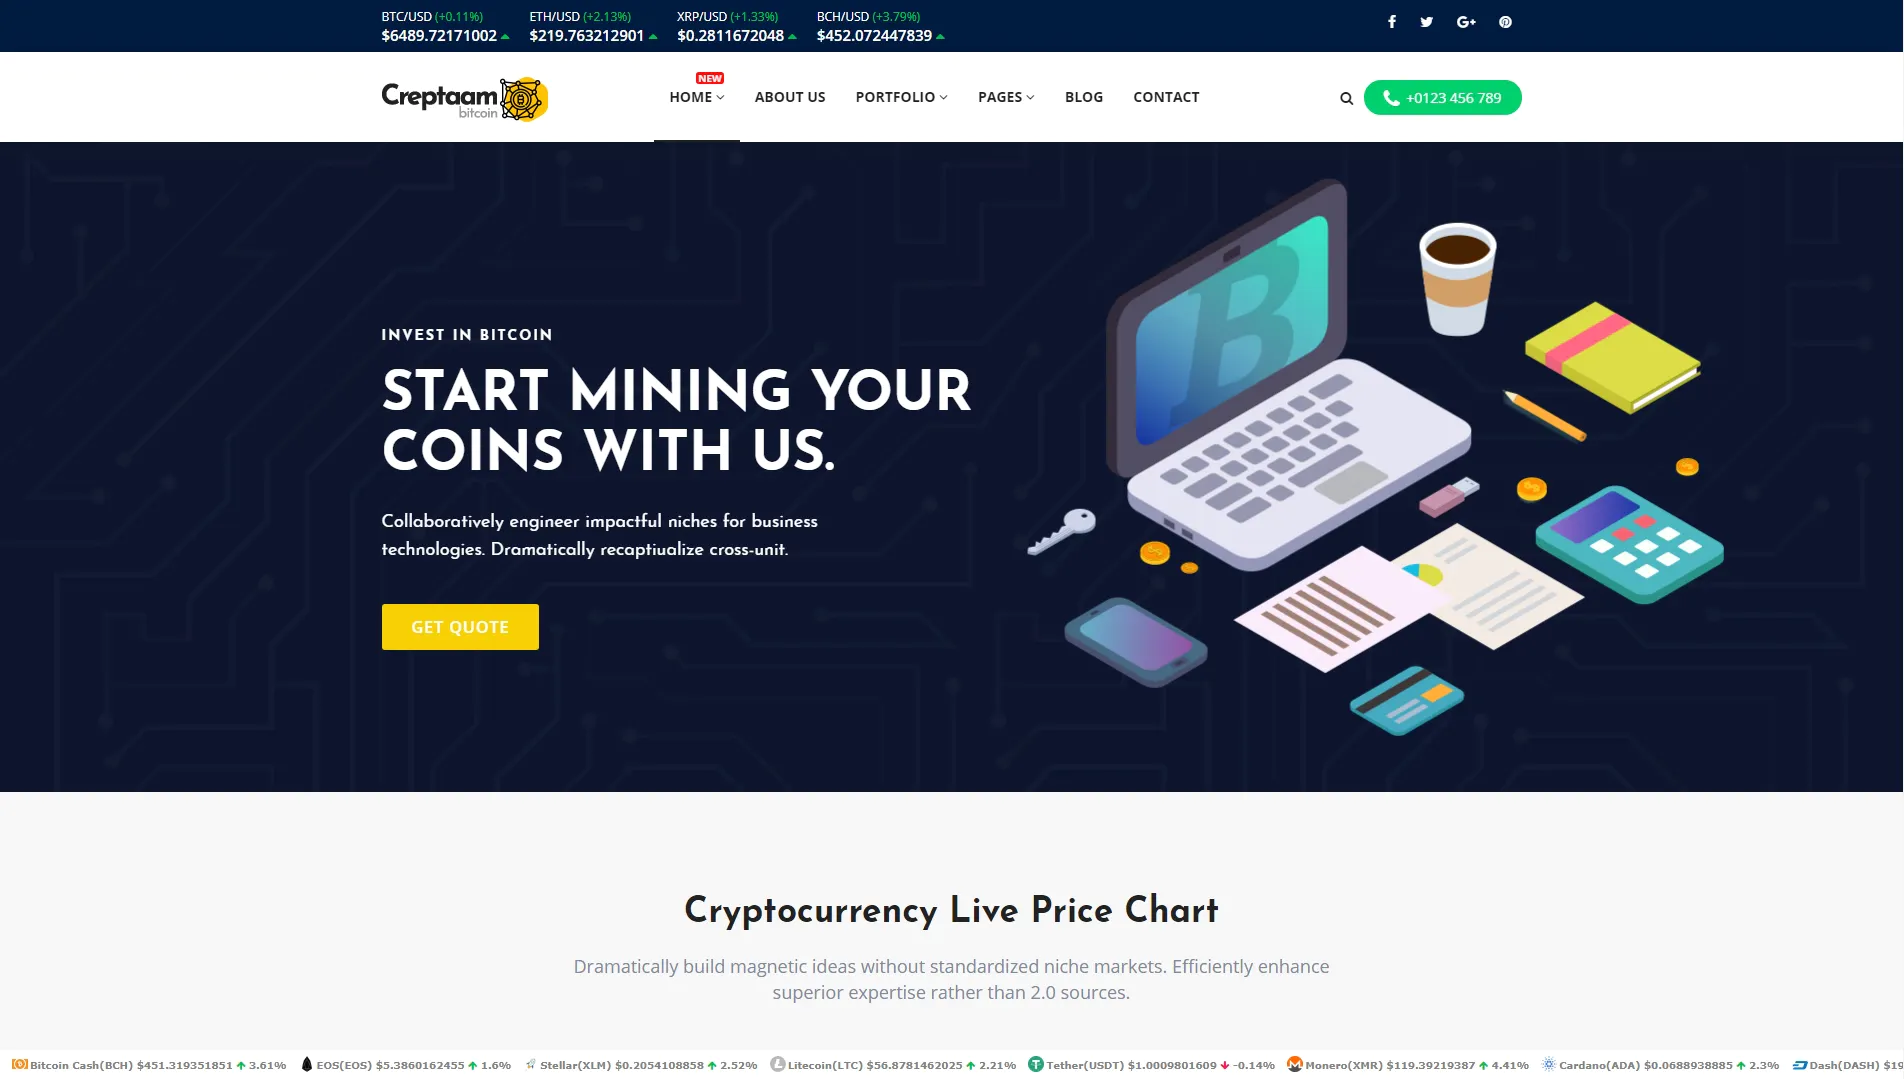 Creptaam - Bitcoin, ICO Landing and Cryptocurrency